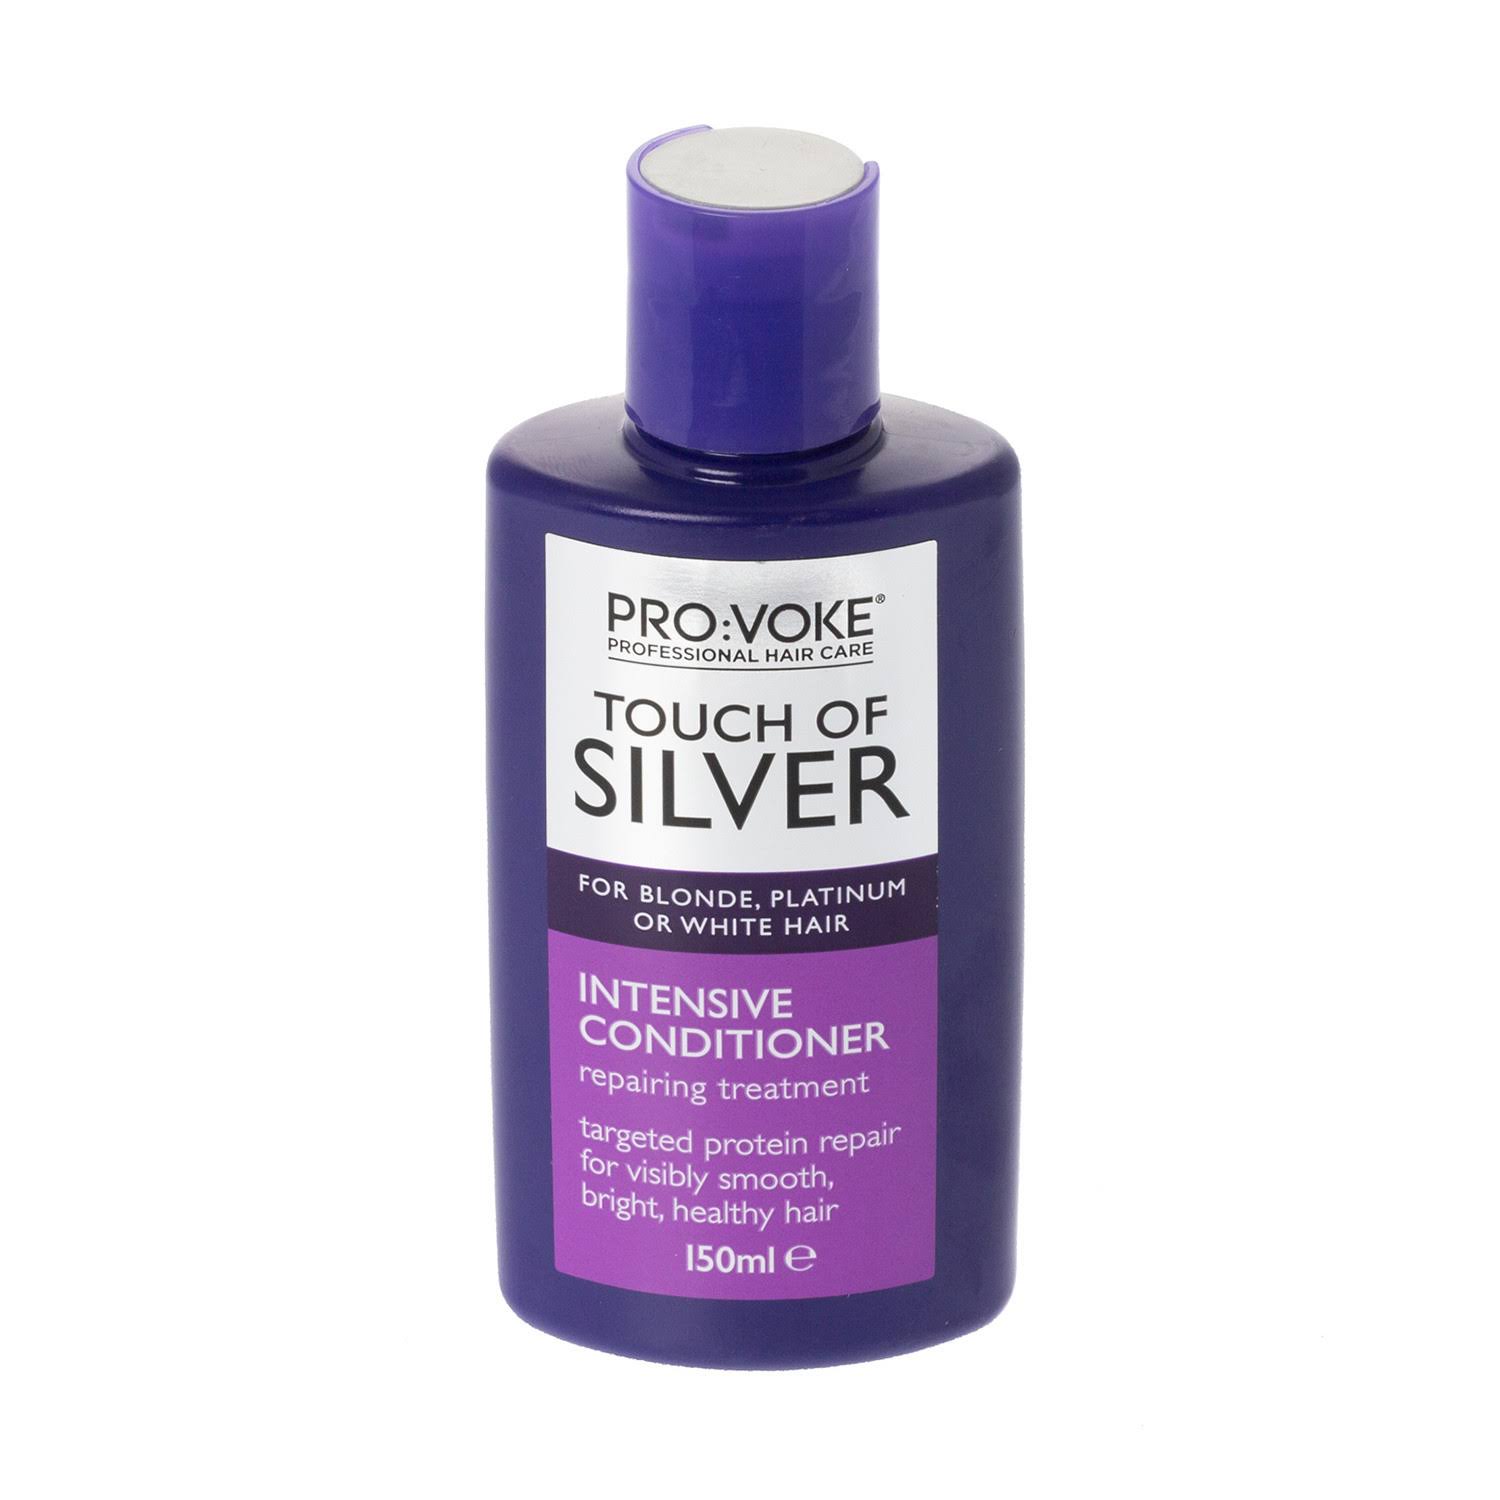 Pro:Voke Touch Of Silver Intensive Conditioner - 150ml